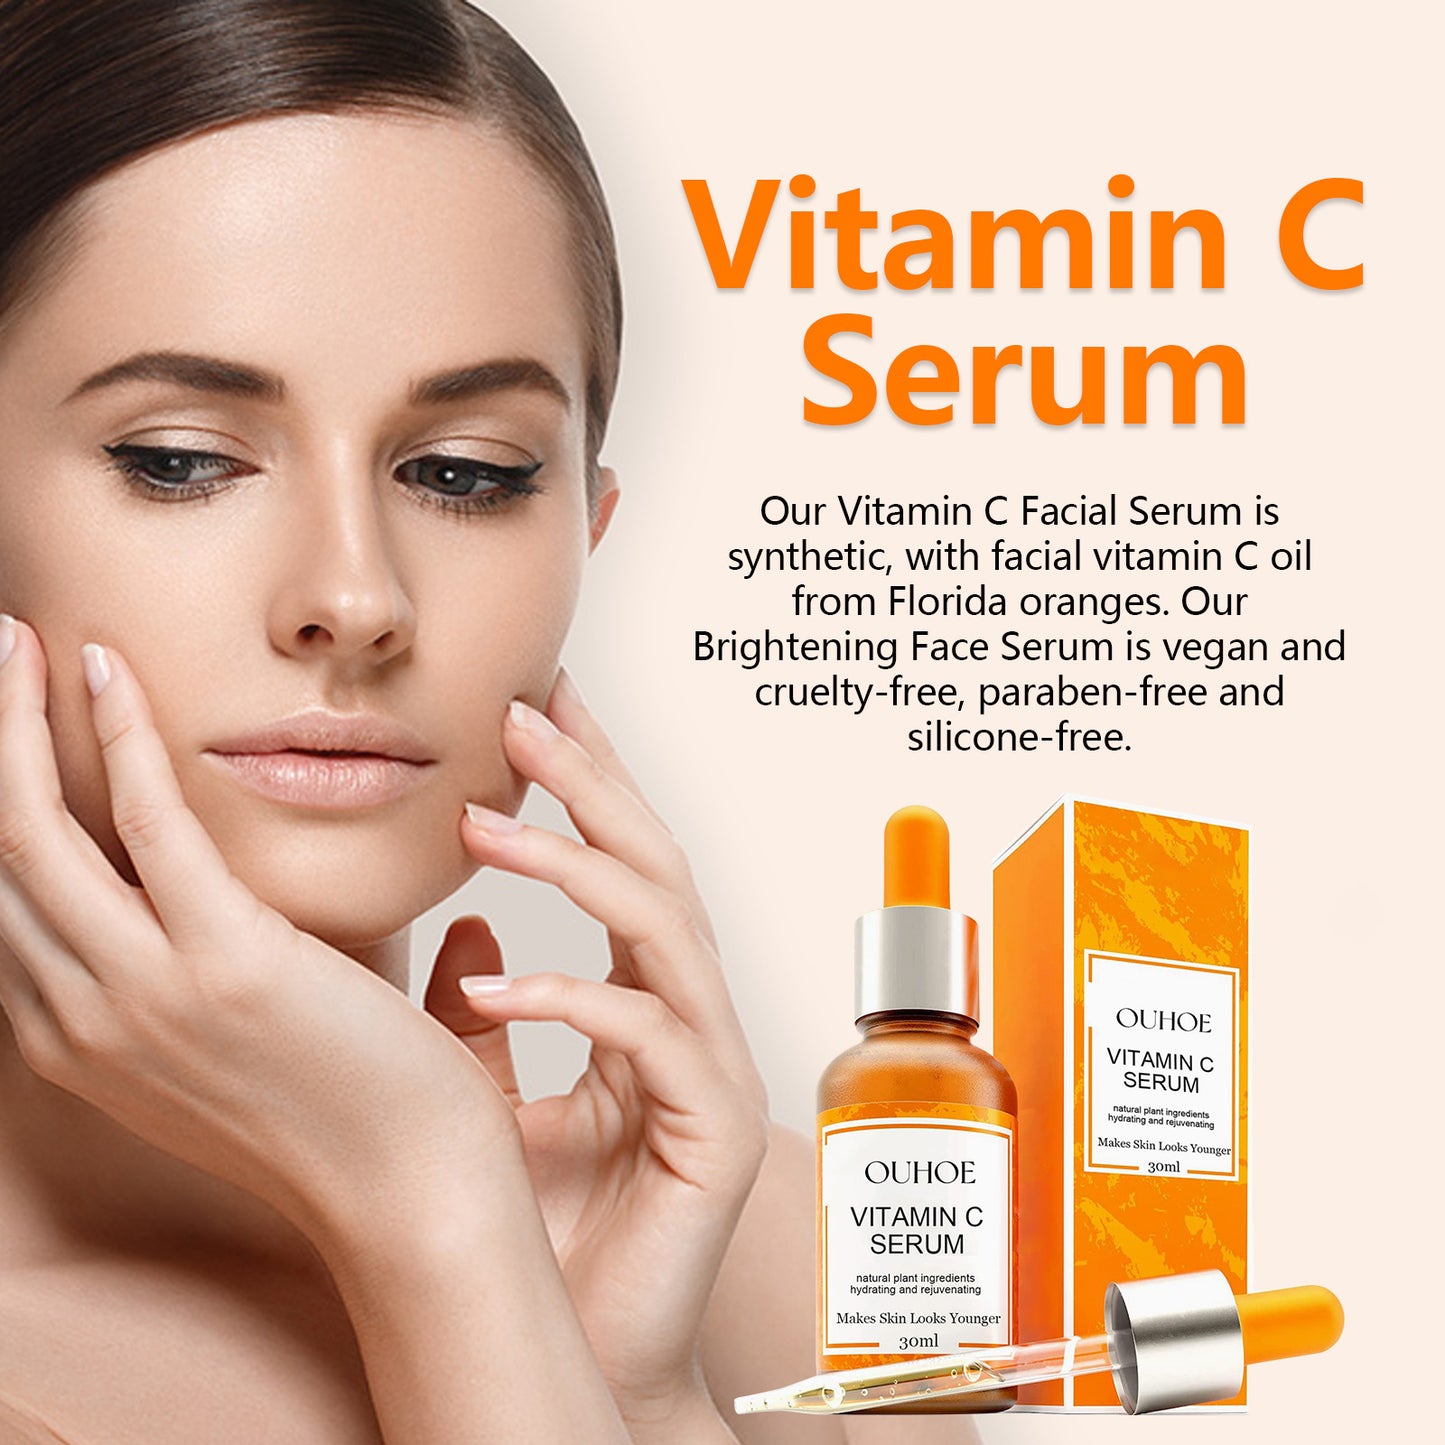 Firming Facial Skin Anti-Aging Care Solution: Fading Wrinkles and Fine Lines